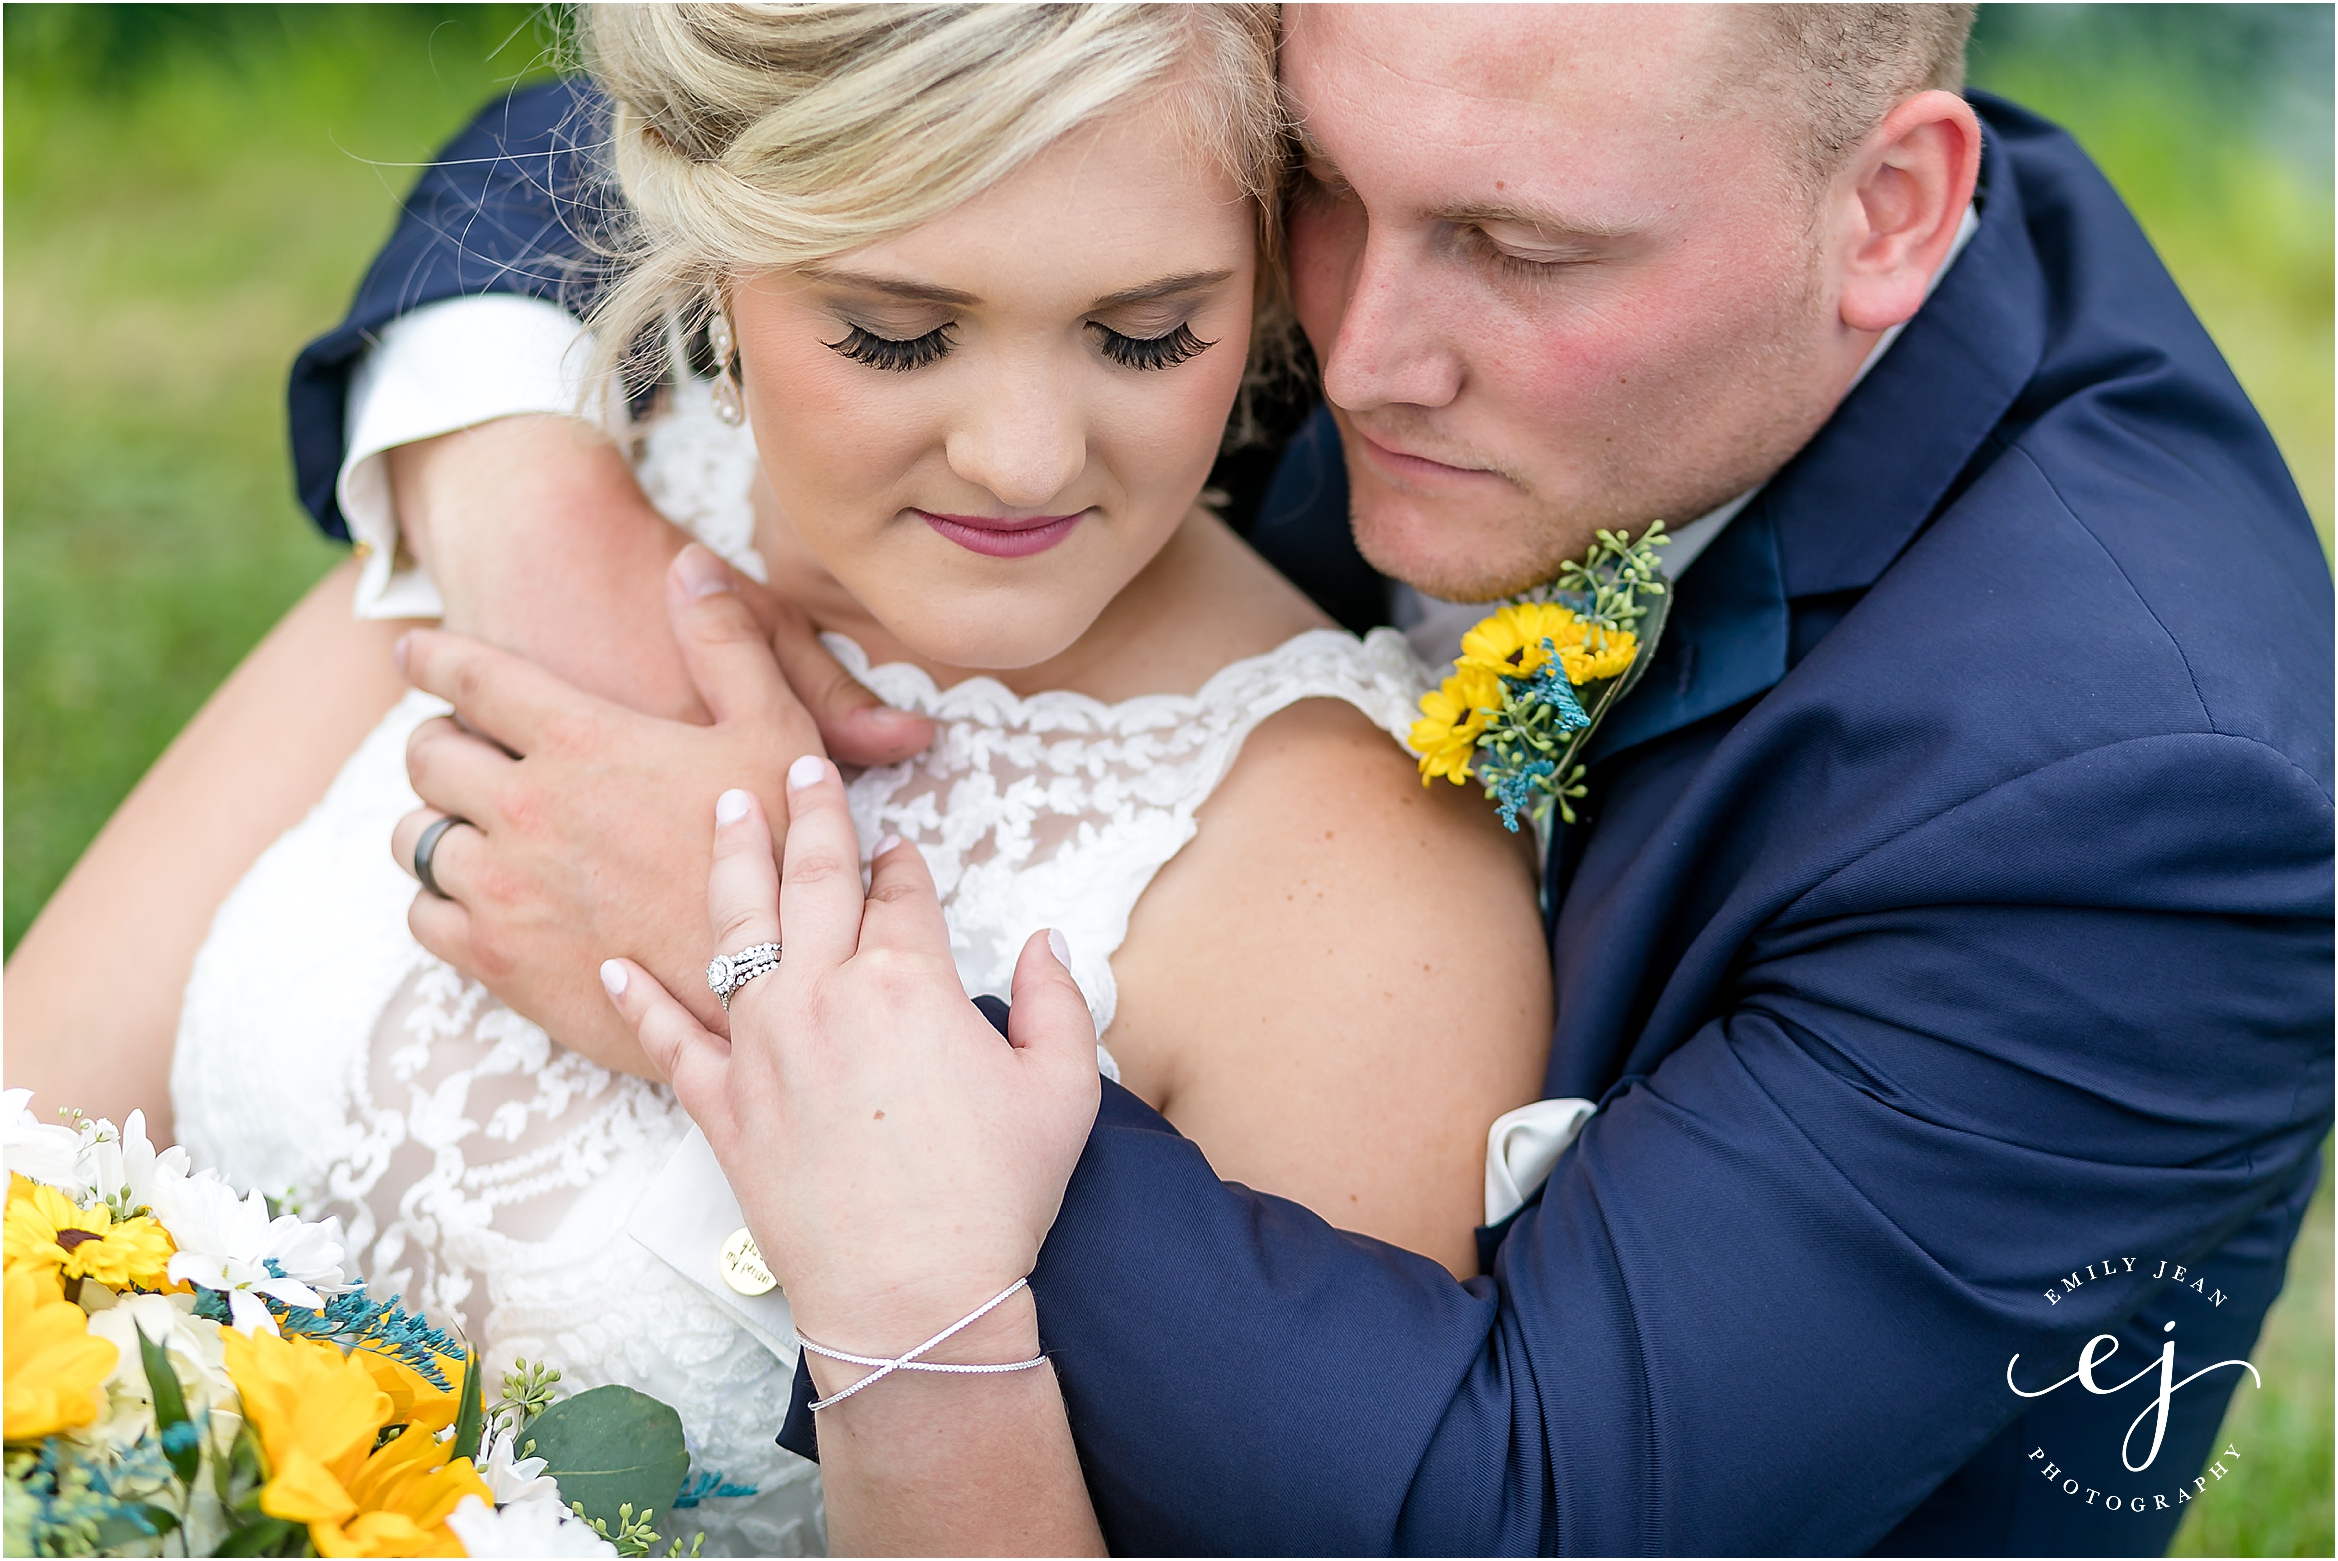 groom with navy suit bride lace dress sunflower bouquet country wedding wisconsin